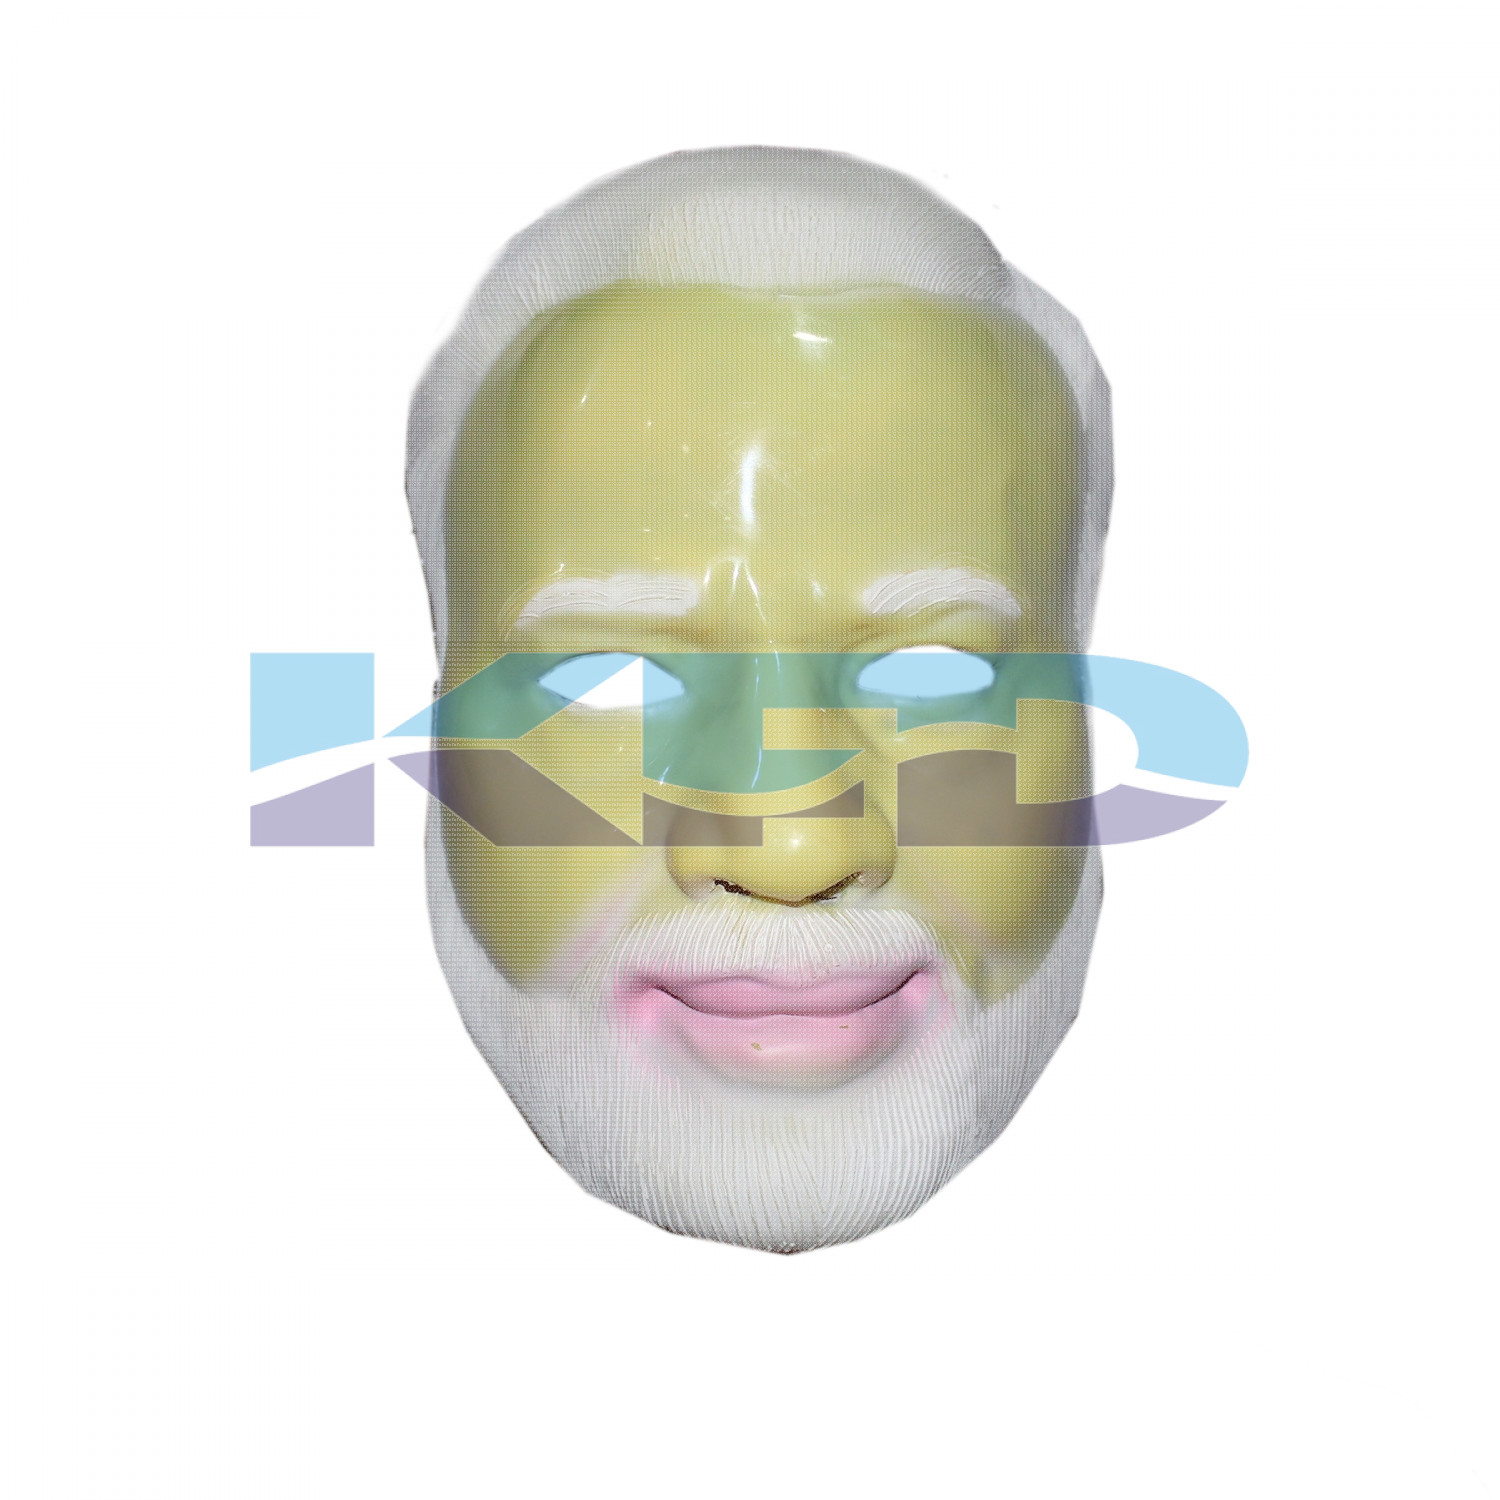 Modi Face/Modi Mask/Narendra Modi Plastic Masks/Modi Plastic Mask Very Popular In Fancy Competition/School Annual function/Theme Party/Competition/Stage Shows/Birthday Party Dress